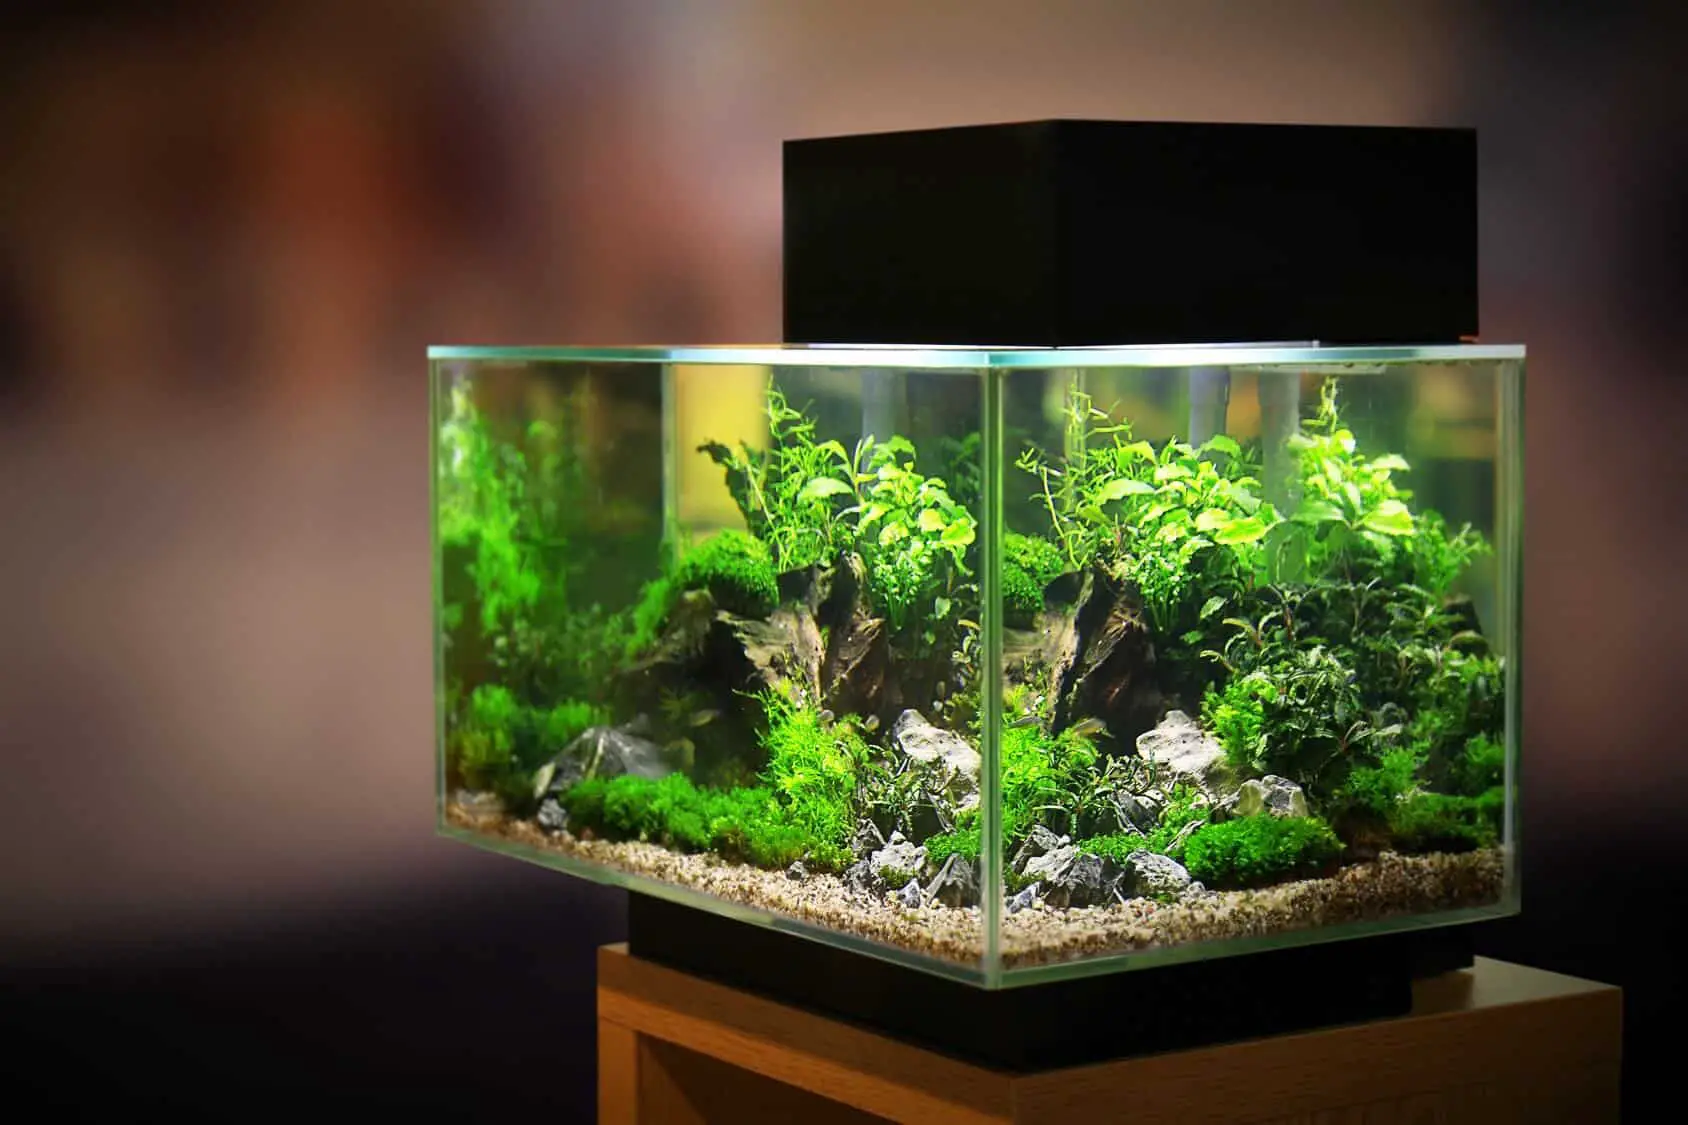 KollerCraft Smart Tank 6.5-Gallon Aquarium Kit, Create Custom LED Light  Colors, Monitor Tank Temperature, Schedule Maintenance Reminders and Alerts  Easily From Your iPhone or Android - Walmart.com